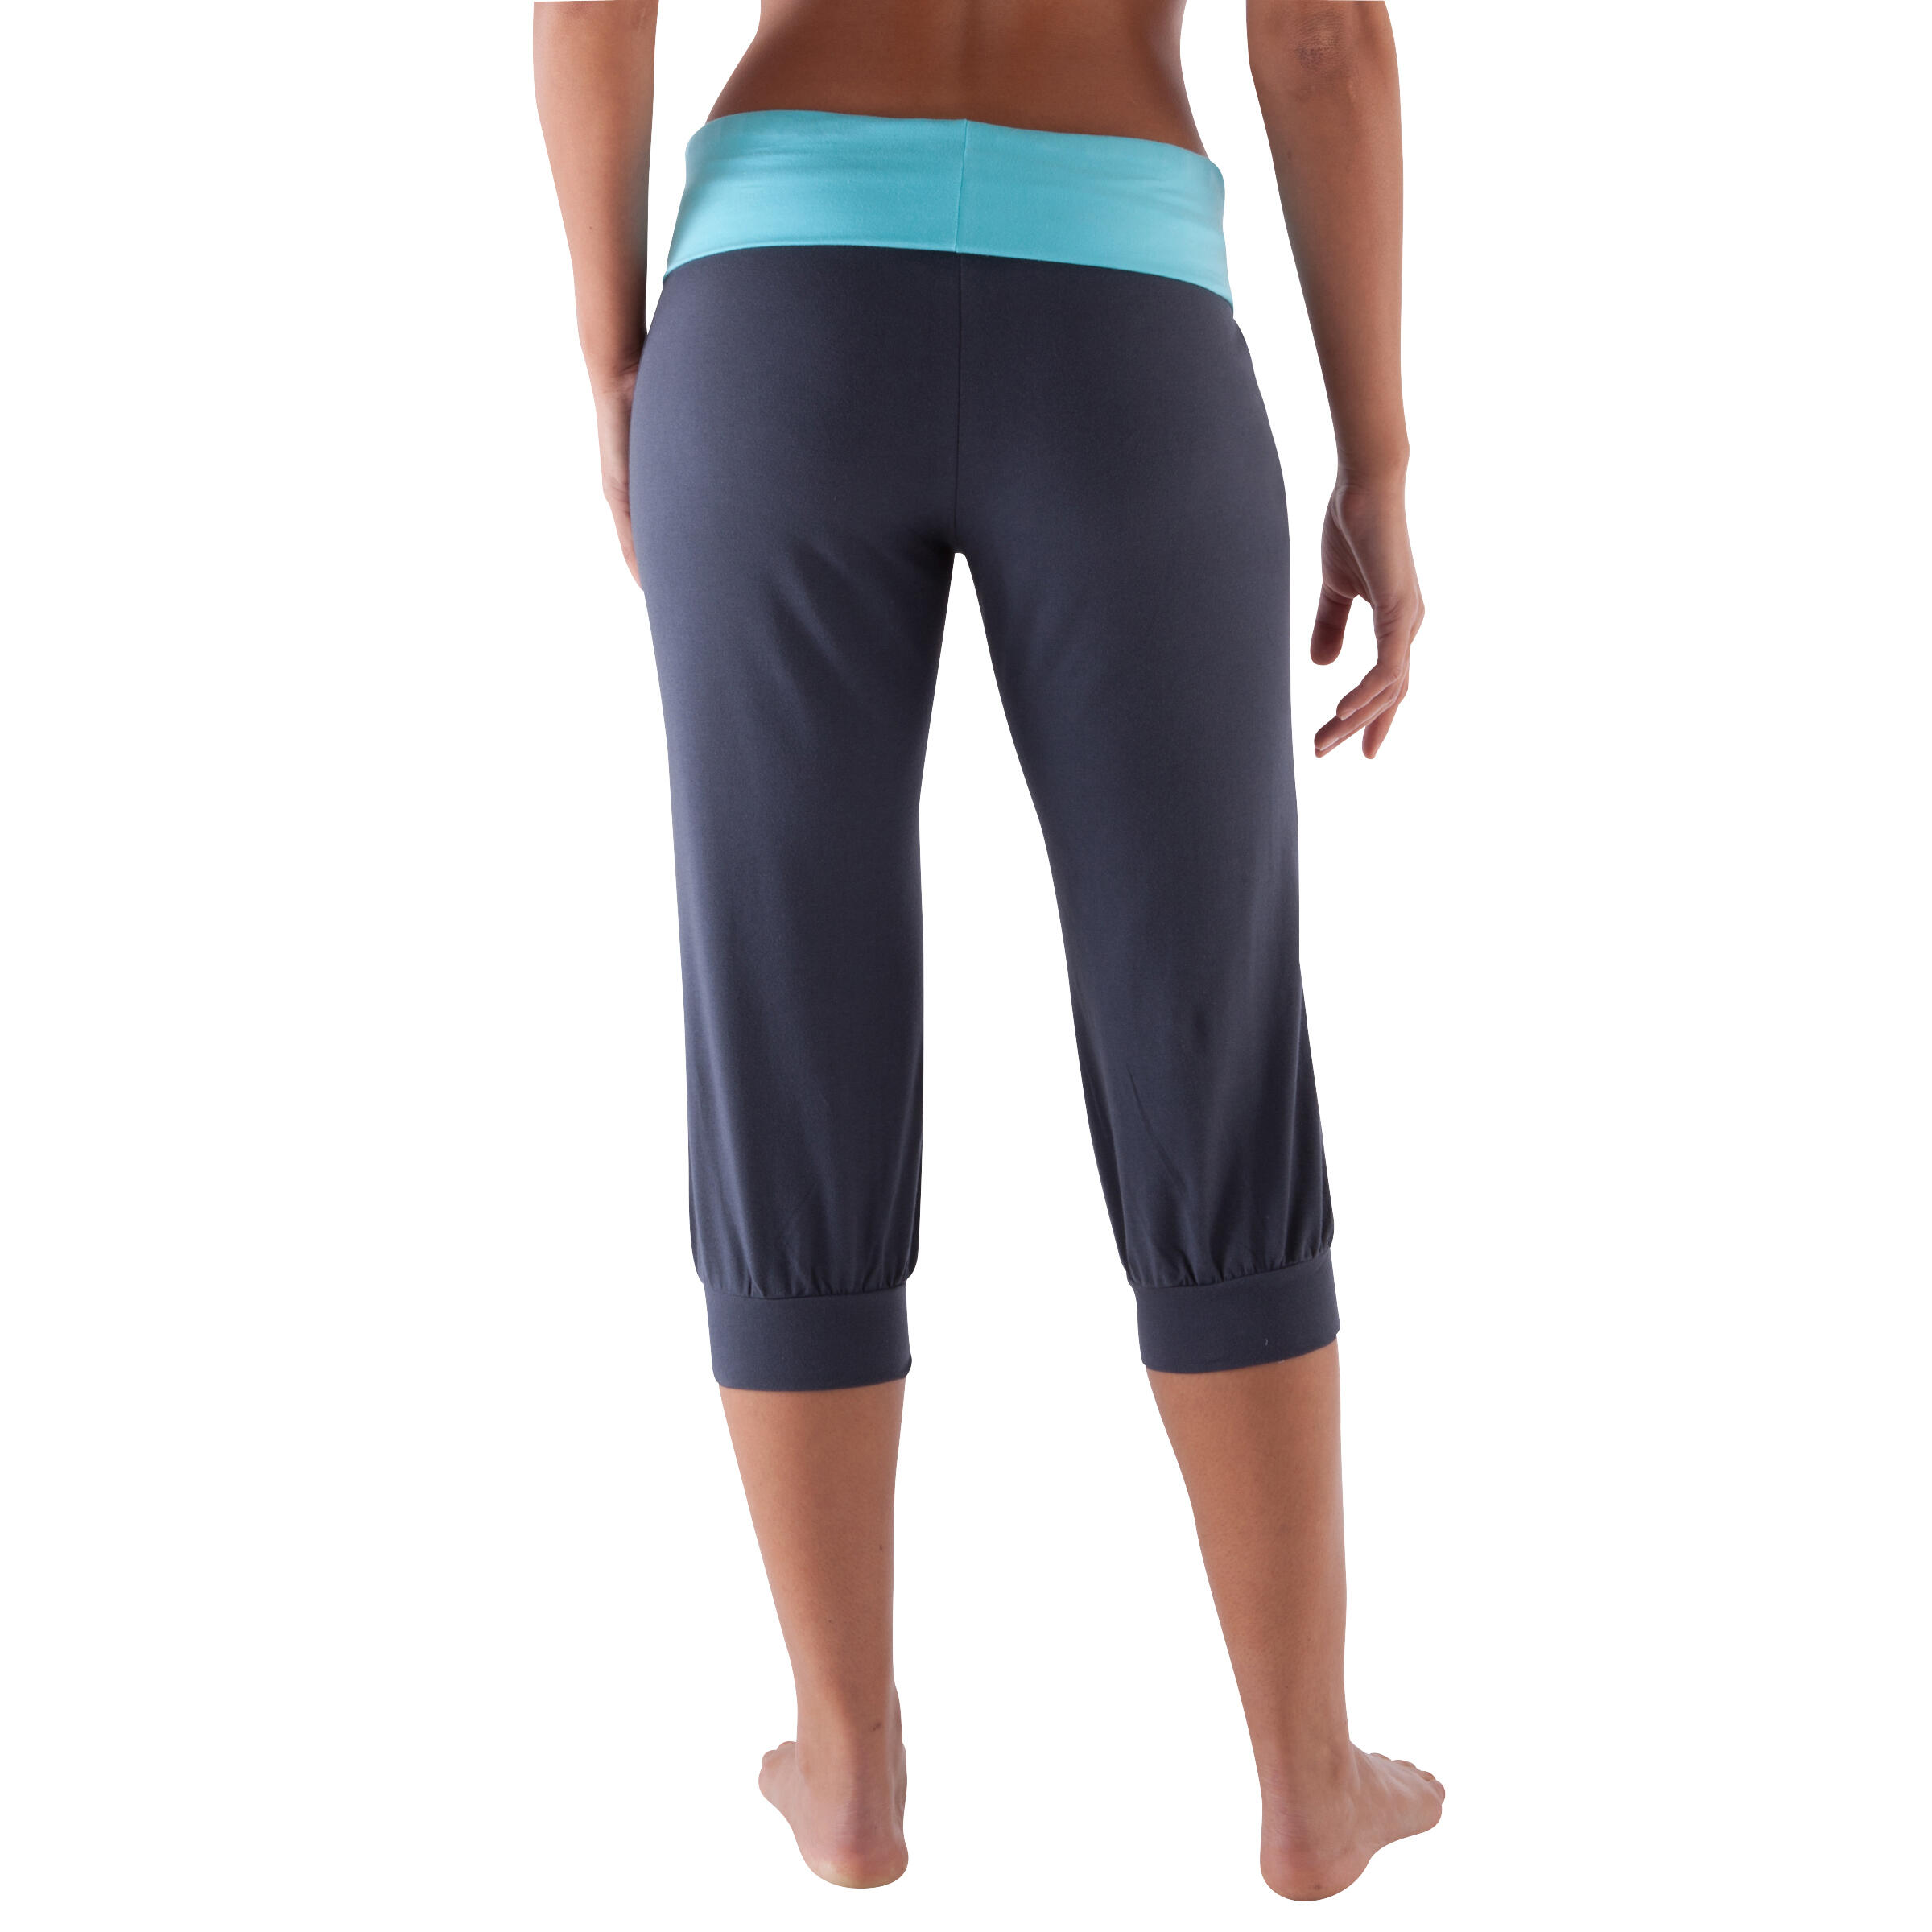 Women's Gentle Gym Yoga and Pilates Organic-Cotton Cropped Bottoms - Grey/Blue 5/10